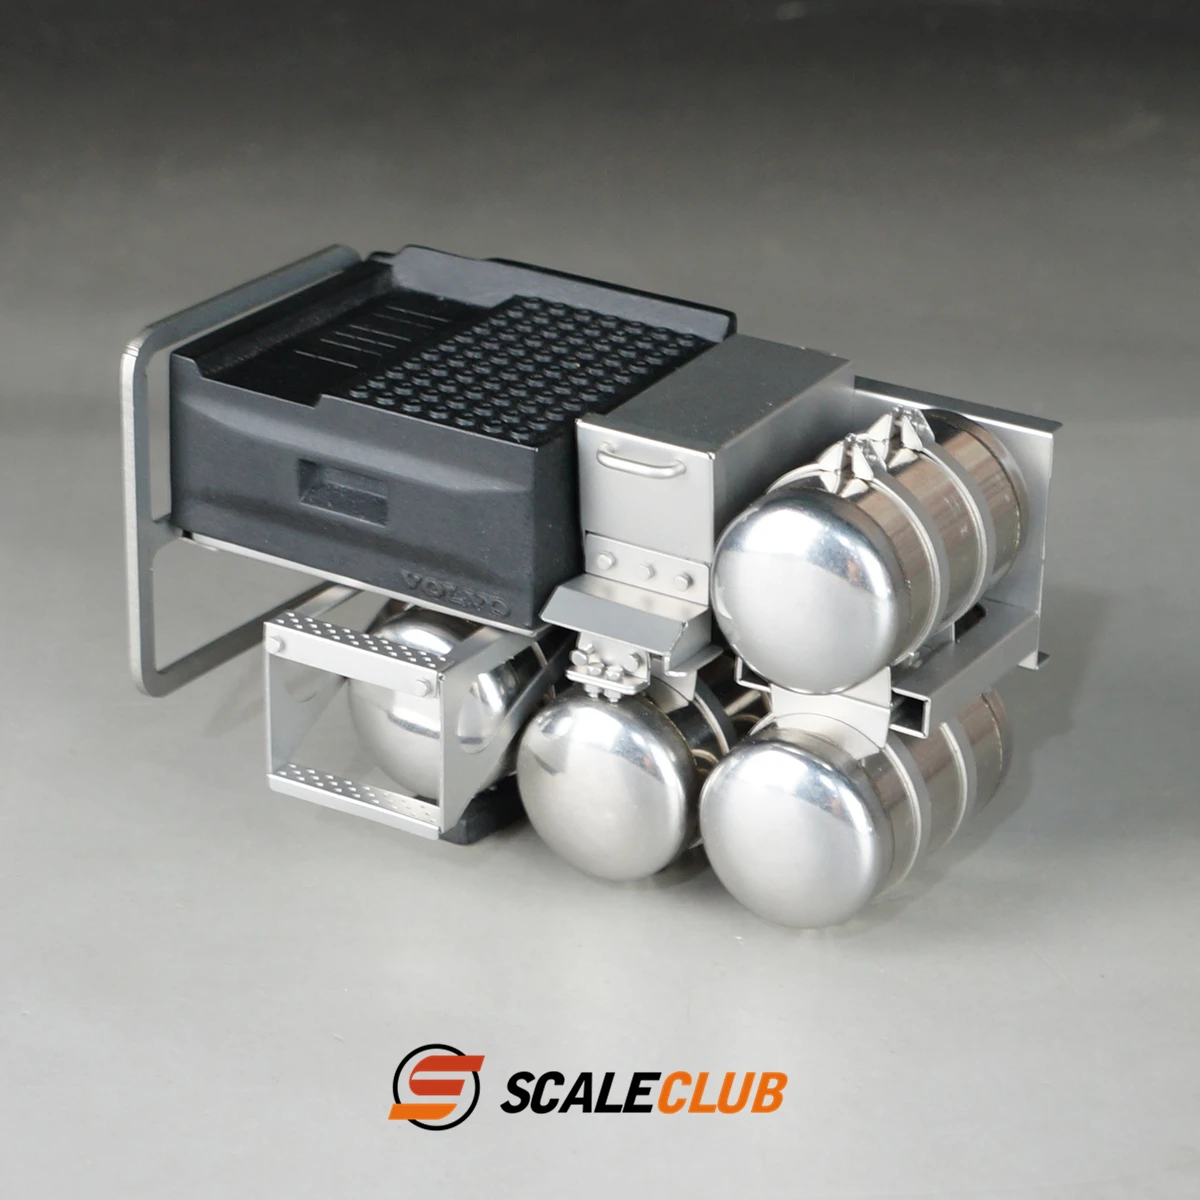 

Scaleclub 1/14 Trailer FH750 Metal Battery Box Gas Tank With Pedal Set Lesu Truck Model Toy Hobby